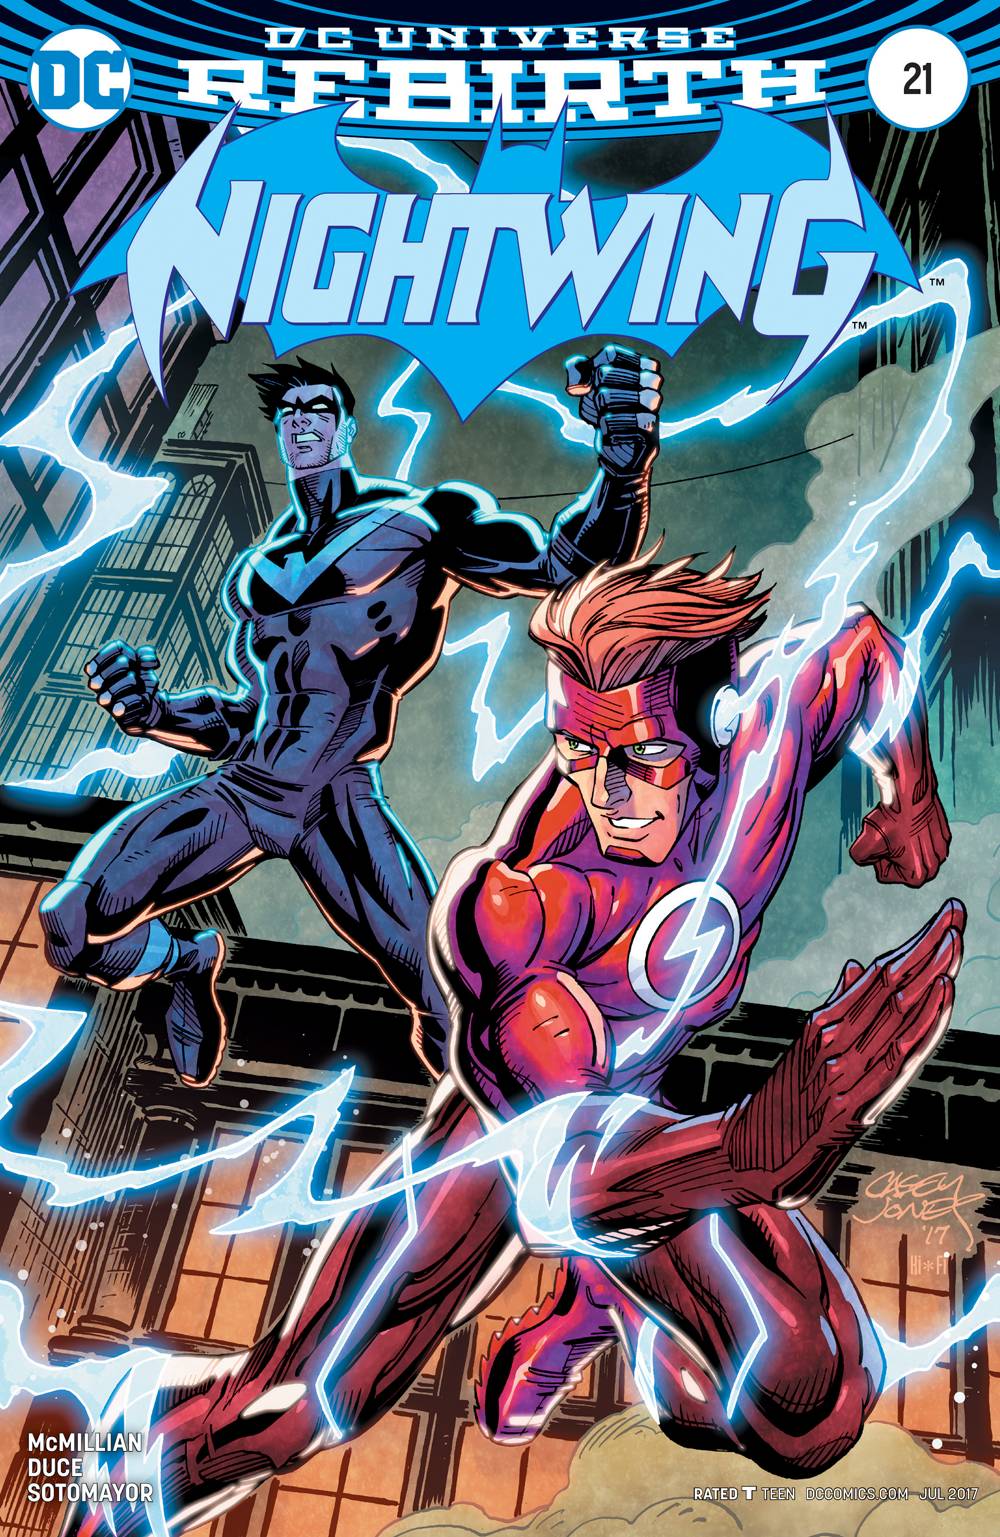 Nightwing #21 Variant Edition (2016)